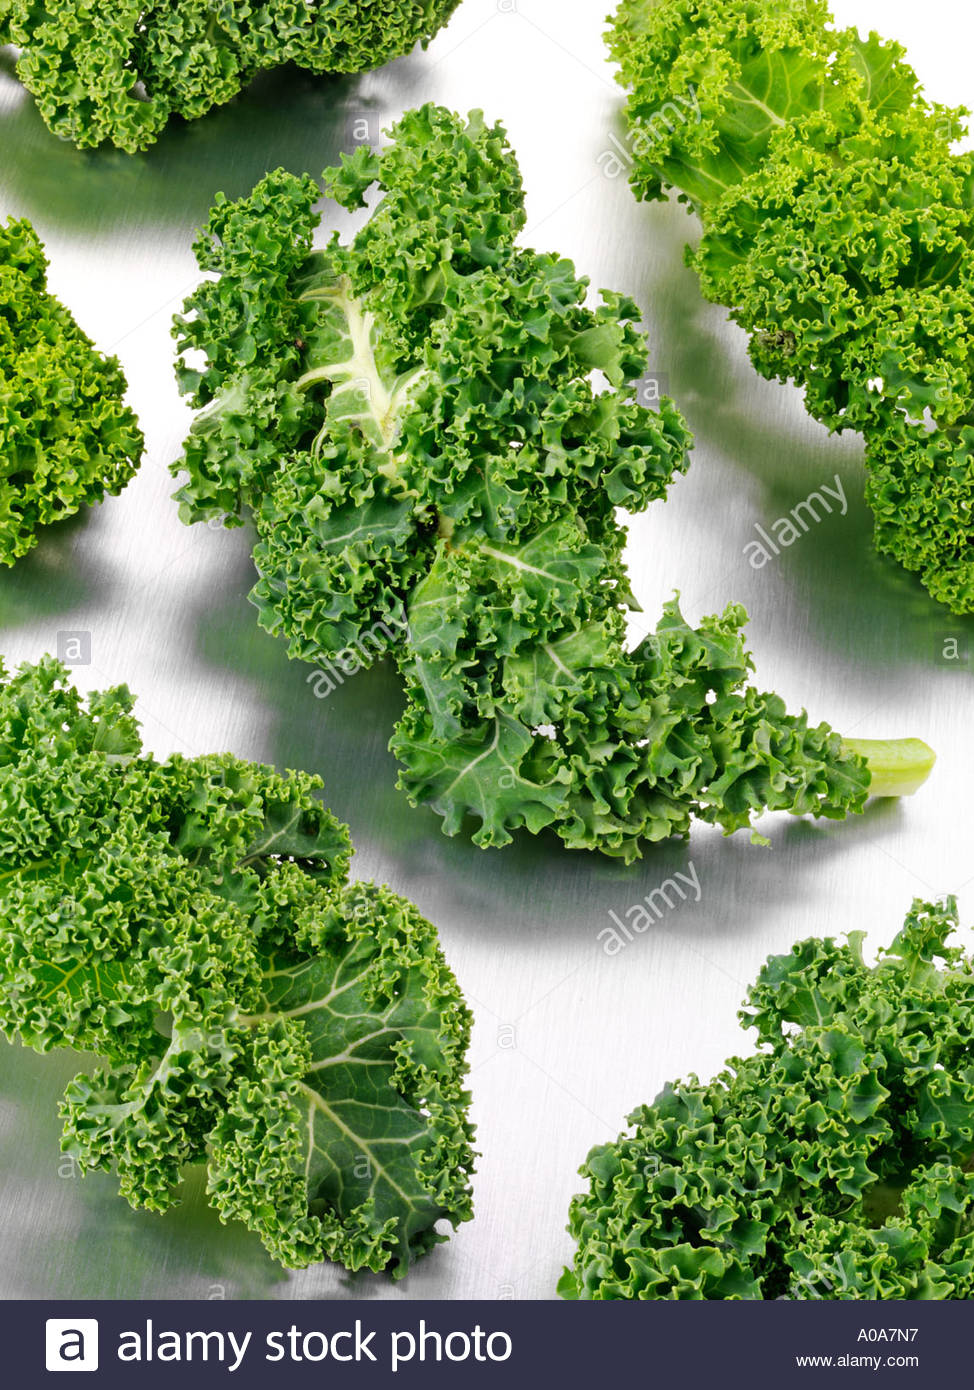 CURLY KALE LEAVES - Stock Image